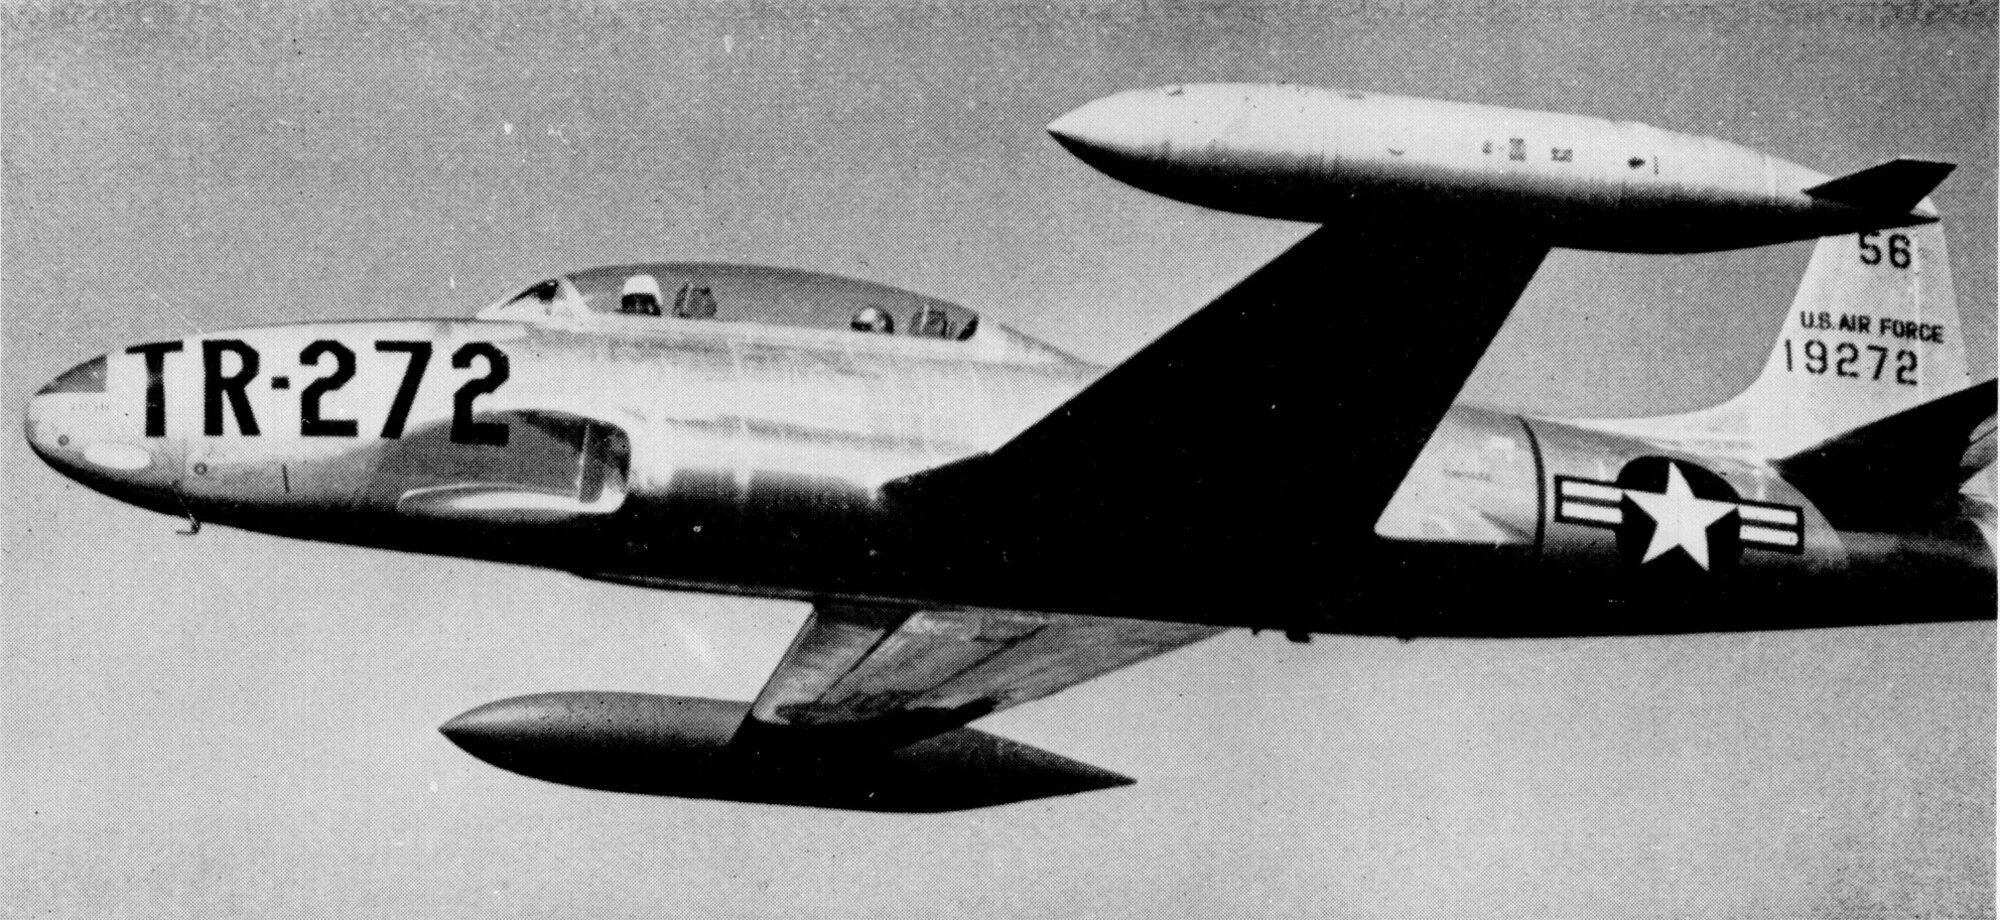 A T-33A Shooting Star shown in-flight in standard training configuration with wingtip tanks wearing natural-metal and early training command markings.